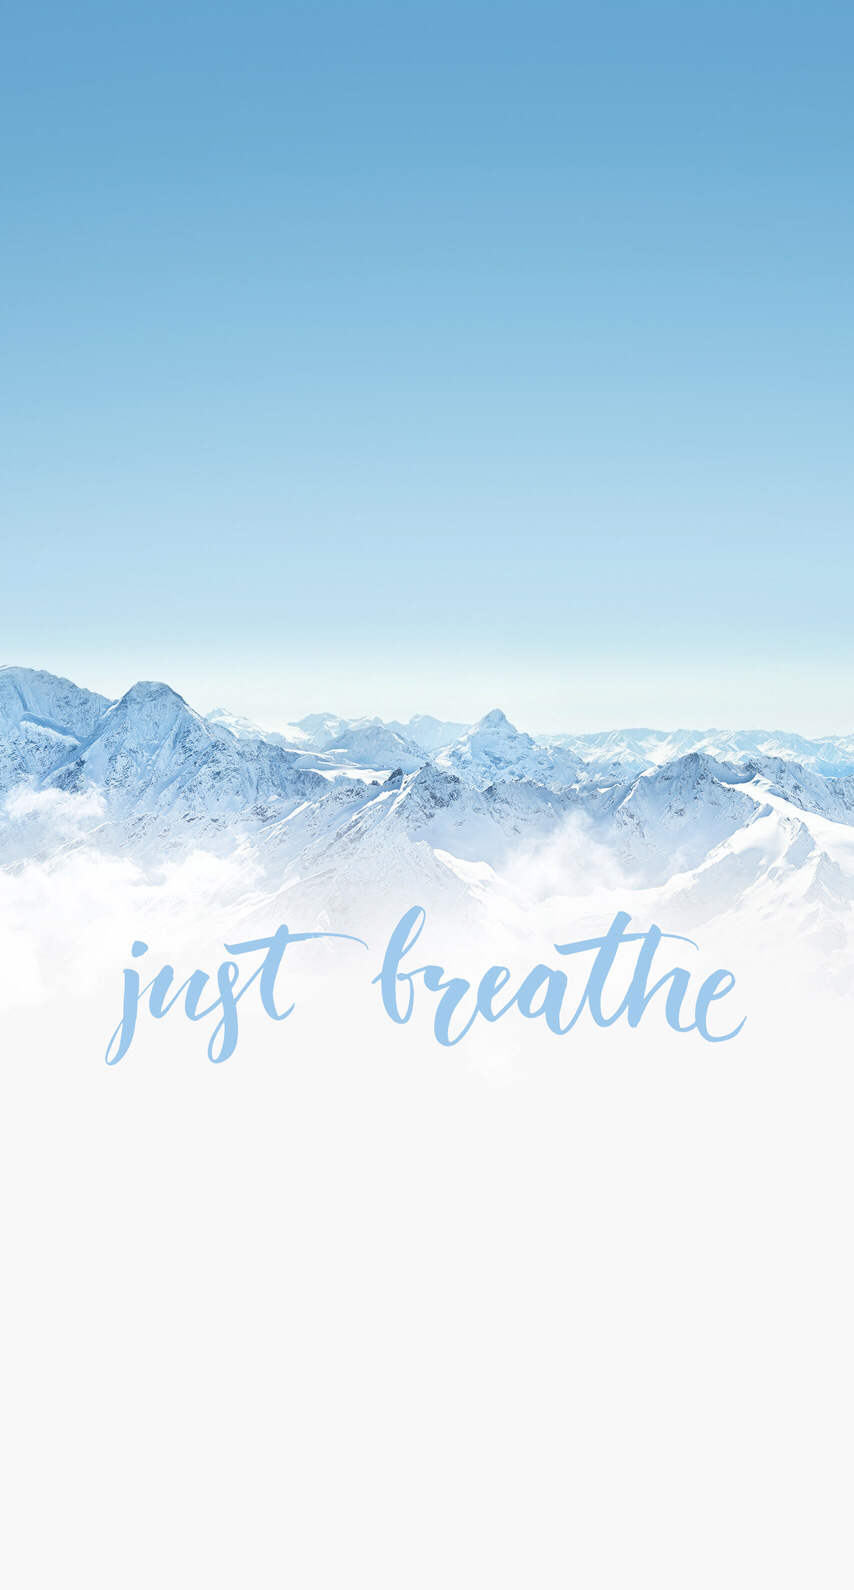 Just breathe ✨❣️✨ quotes inspo. Just breathe quotes, Wallpaper iphone quotes, Wallpaper quotes